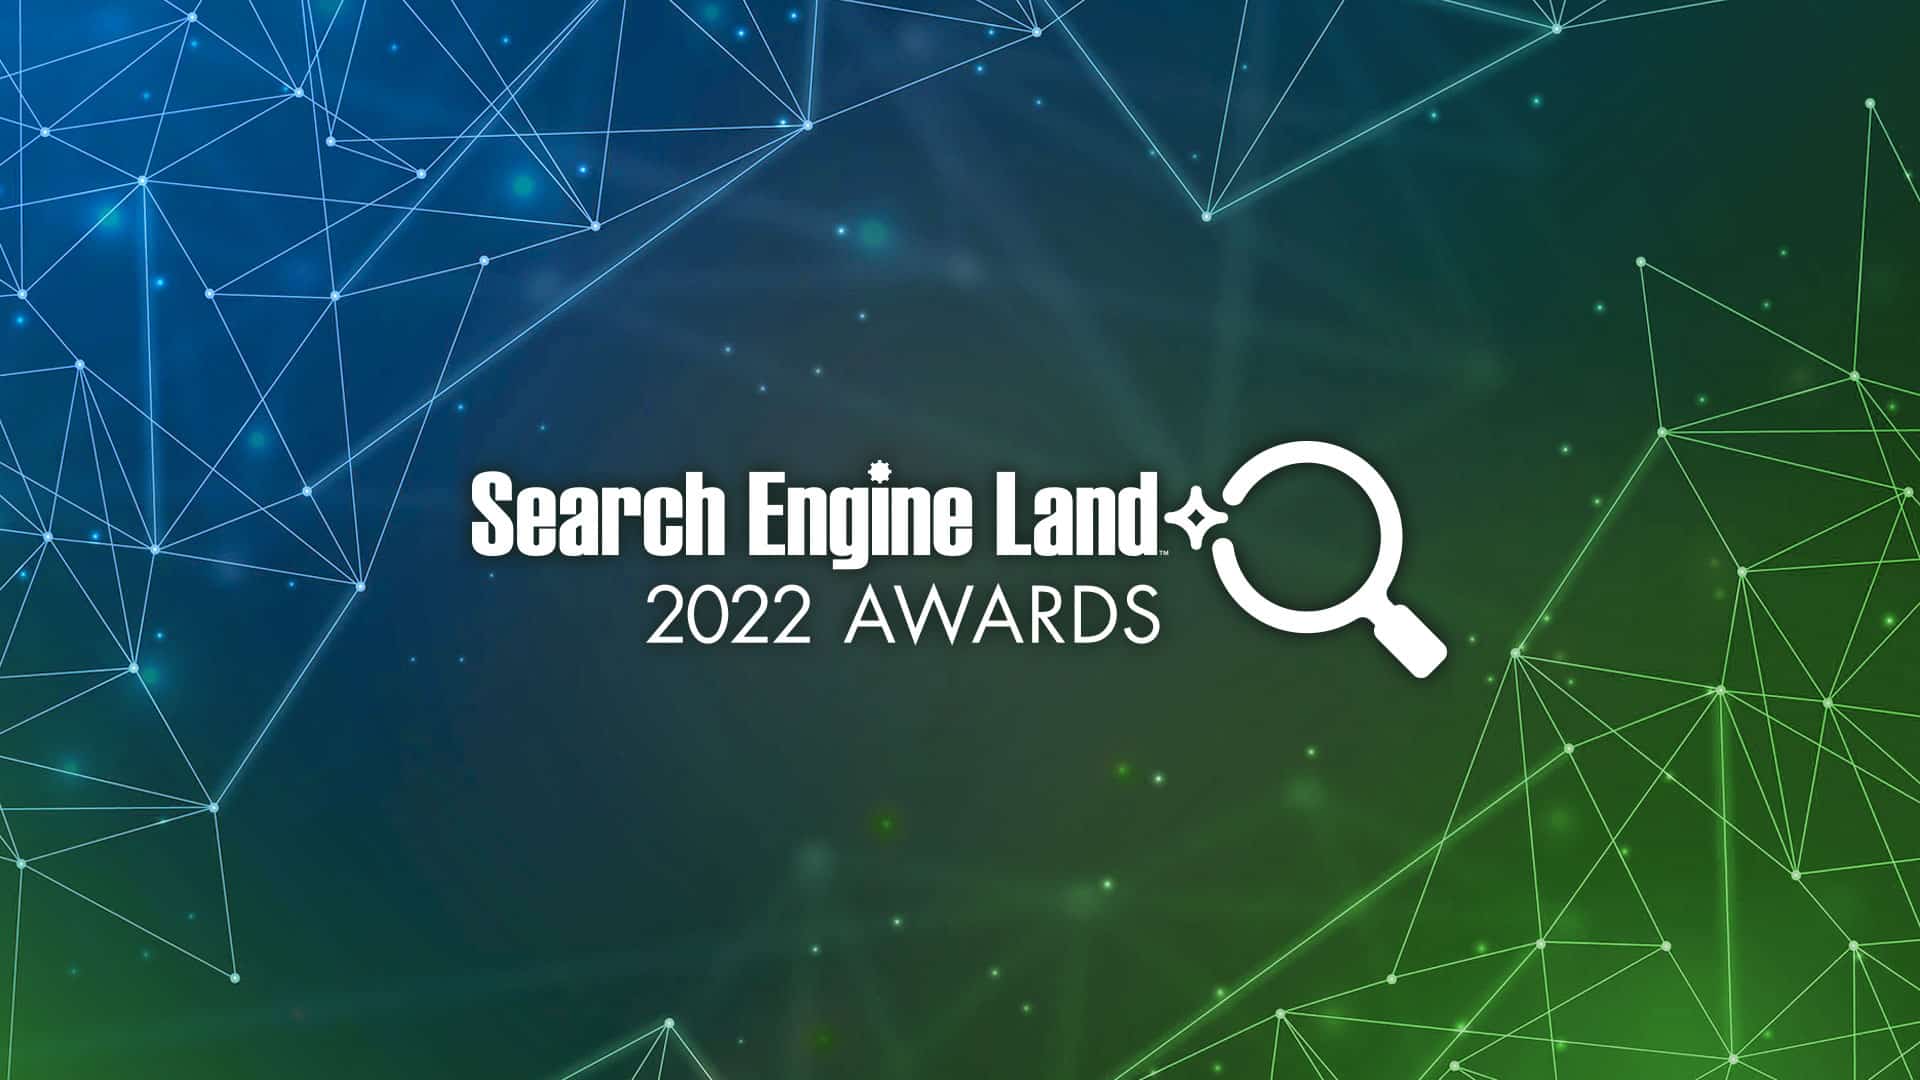 2 weeks until the 2022 Search Engine Land Awards Early Bird Deadline… enter now!